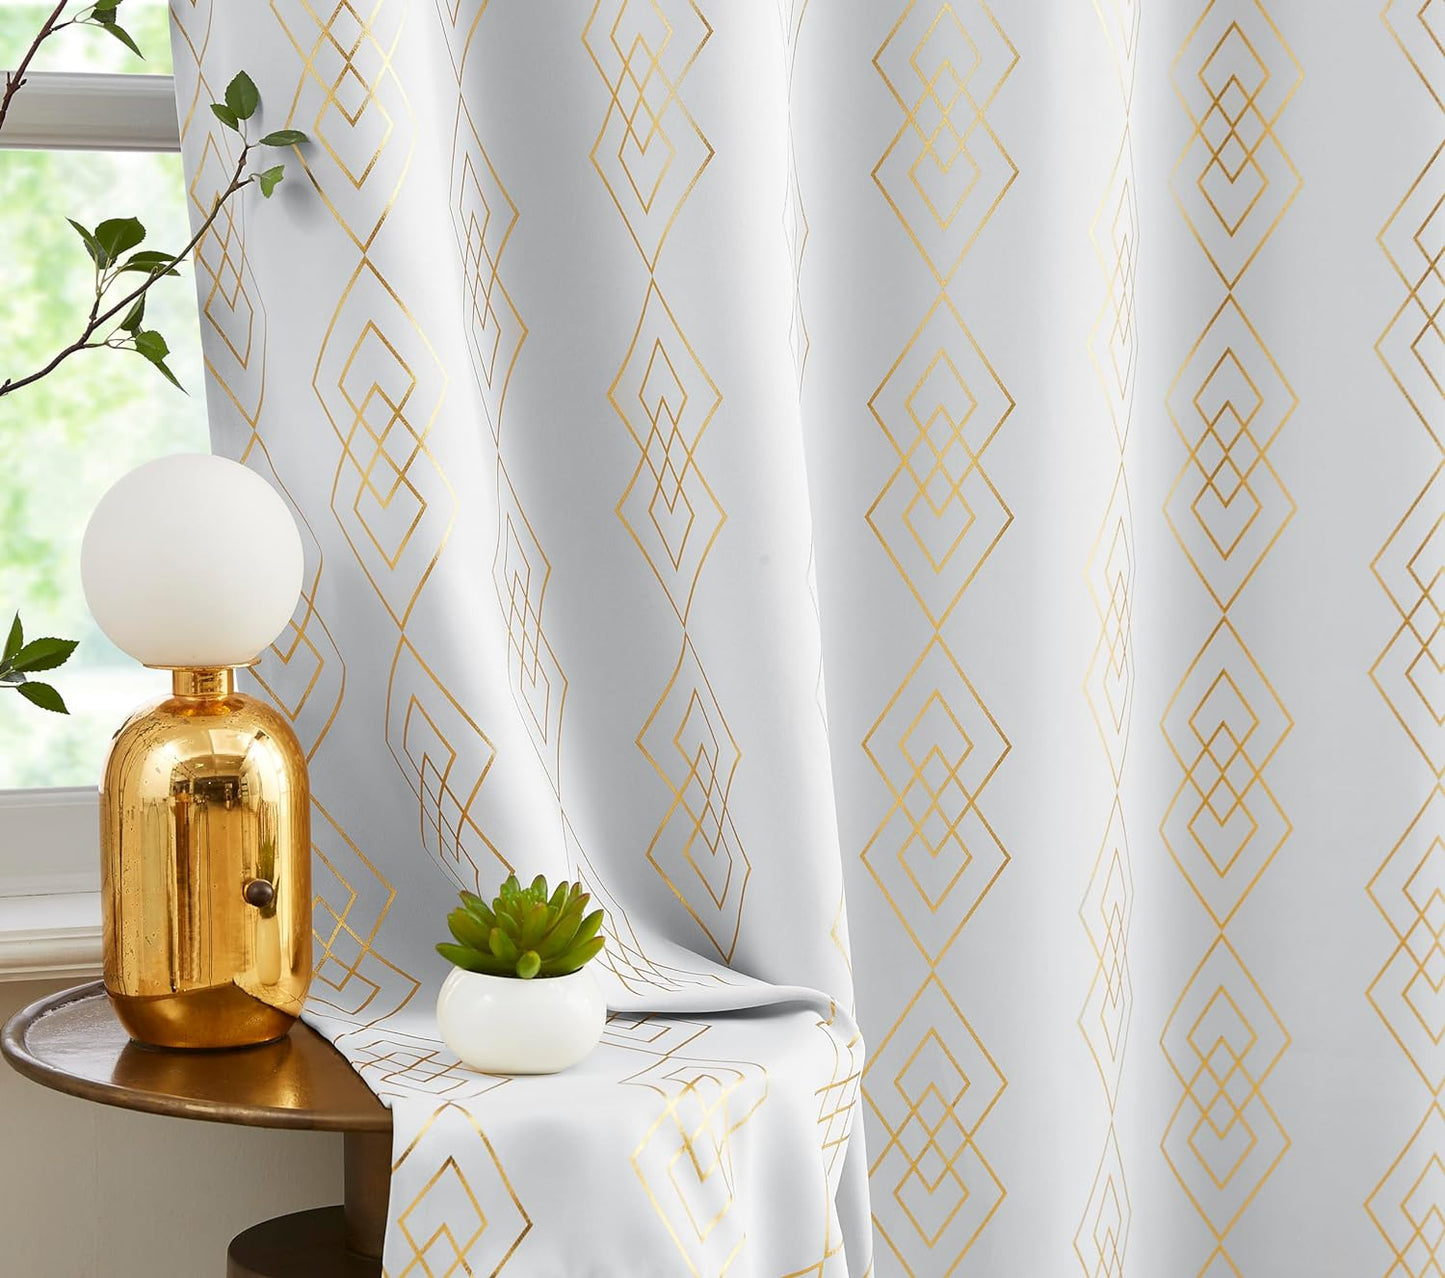 Metallic Geo Blackout Curtain Panels for Bedroom Thermal Insulated Light Blocking Foil Trellis Moroccan Window Treatments Diamond Grommet Drapes for Living-Room, Set of 2, 50" X 84", Beige/Gold  ugoutry Geometric White 50"X63"X2 